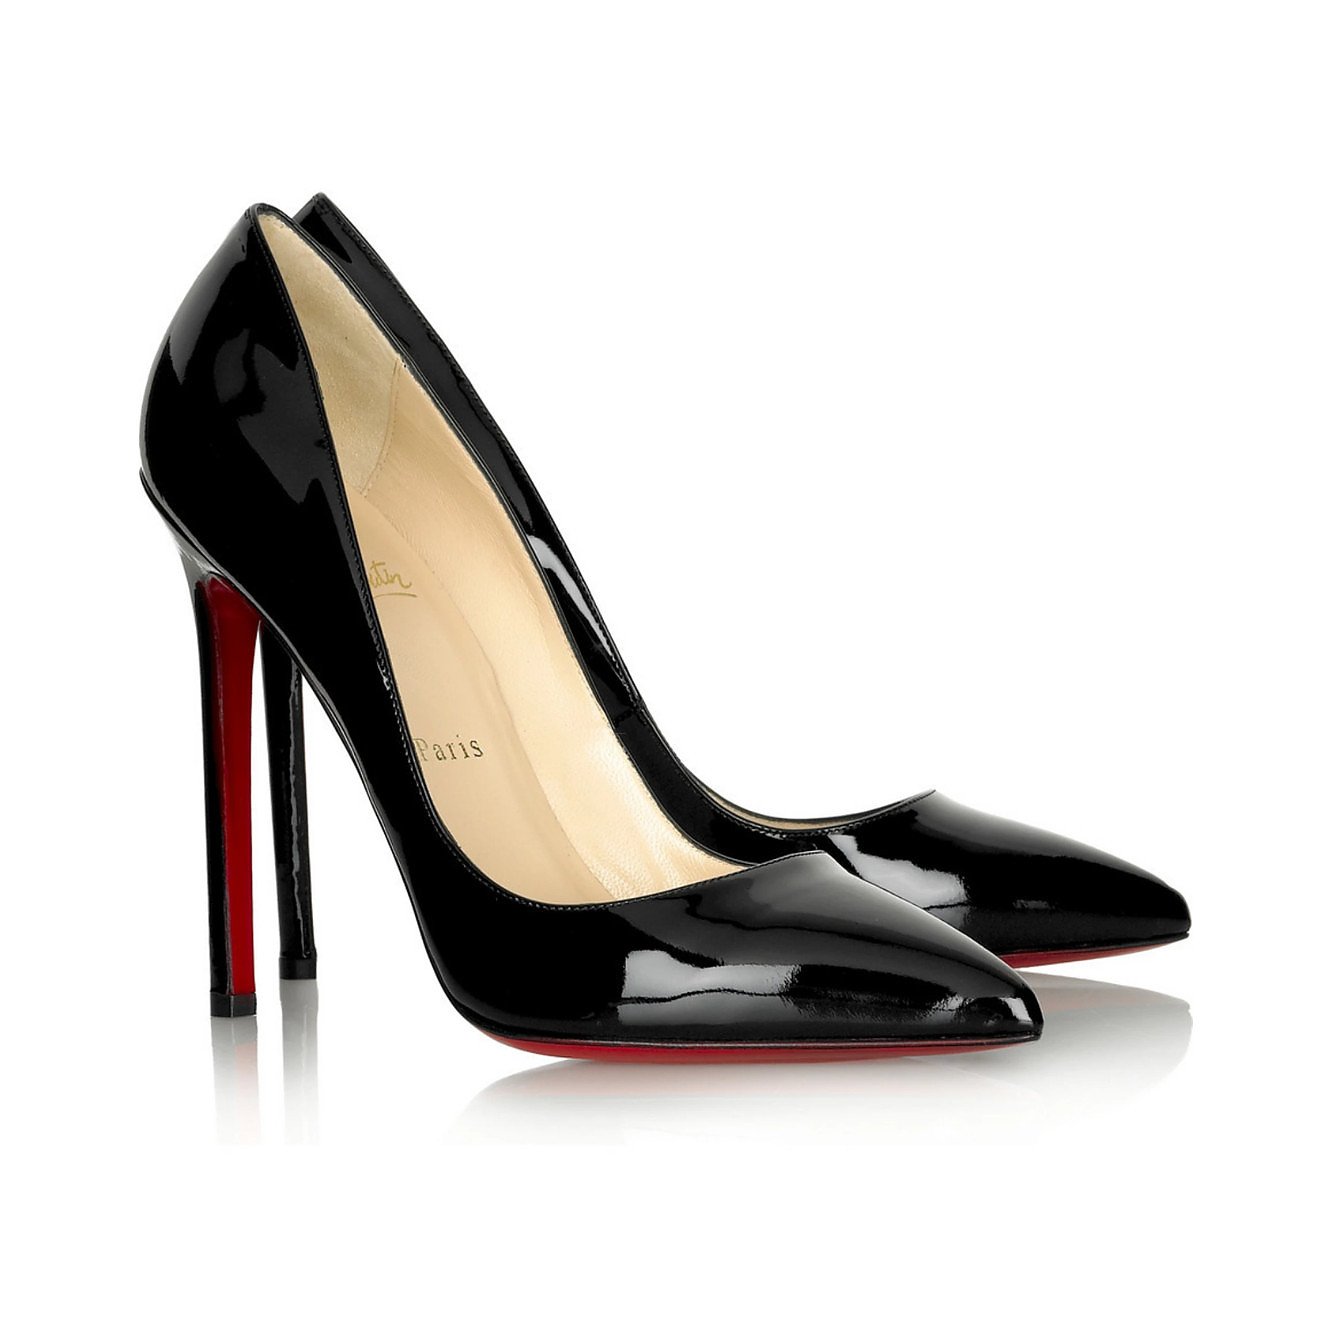 Rent or Buy Christian Louboutin 120 Patent Leather Pumps from MyWardrobeHQ.com